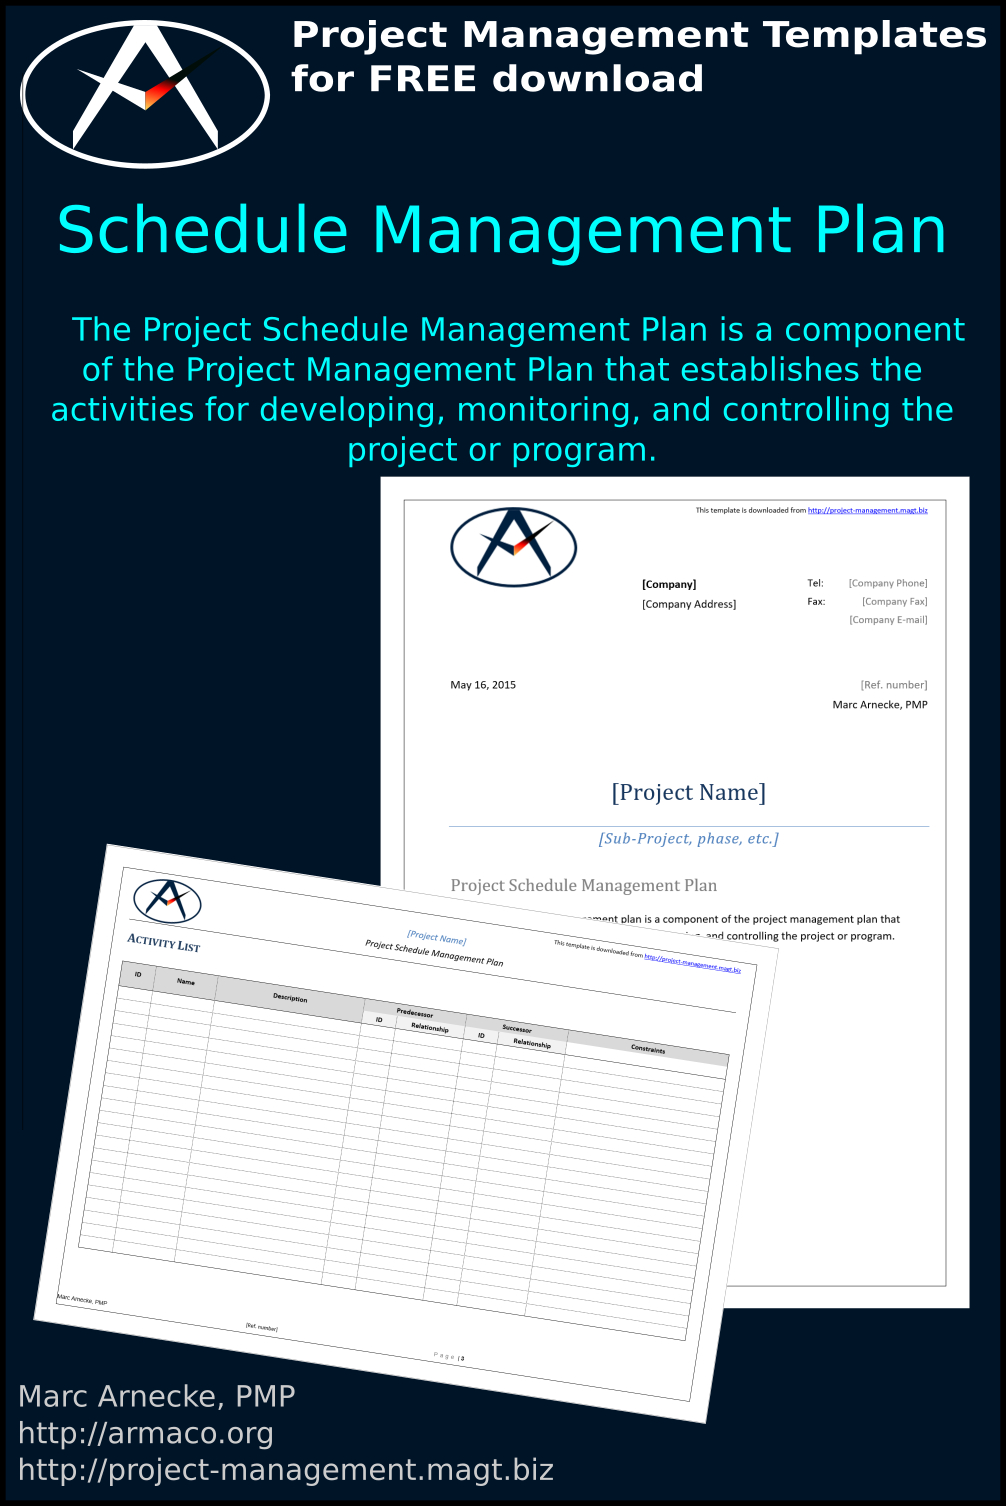 Project Schedule Management | Project Management Templates With Regard To Schedule Management Plan Template